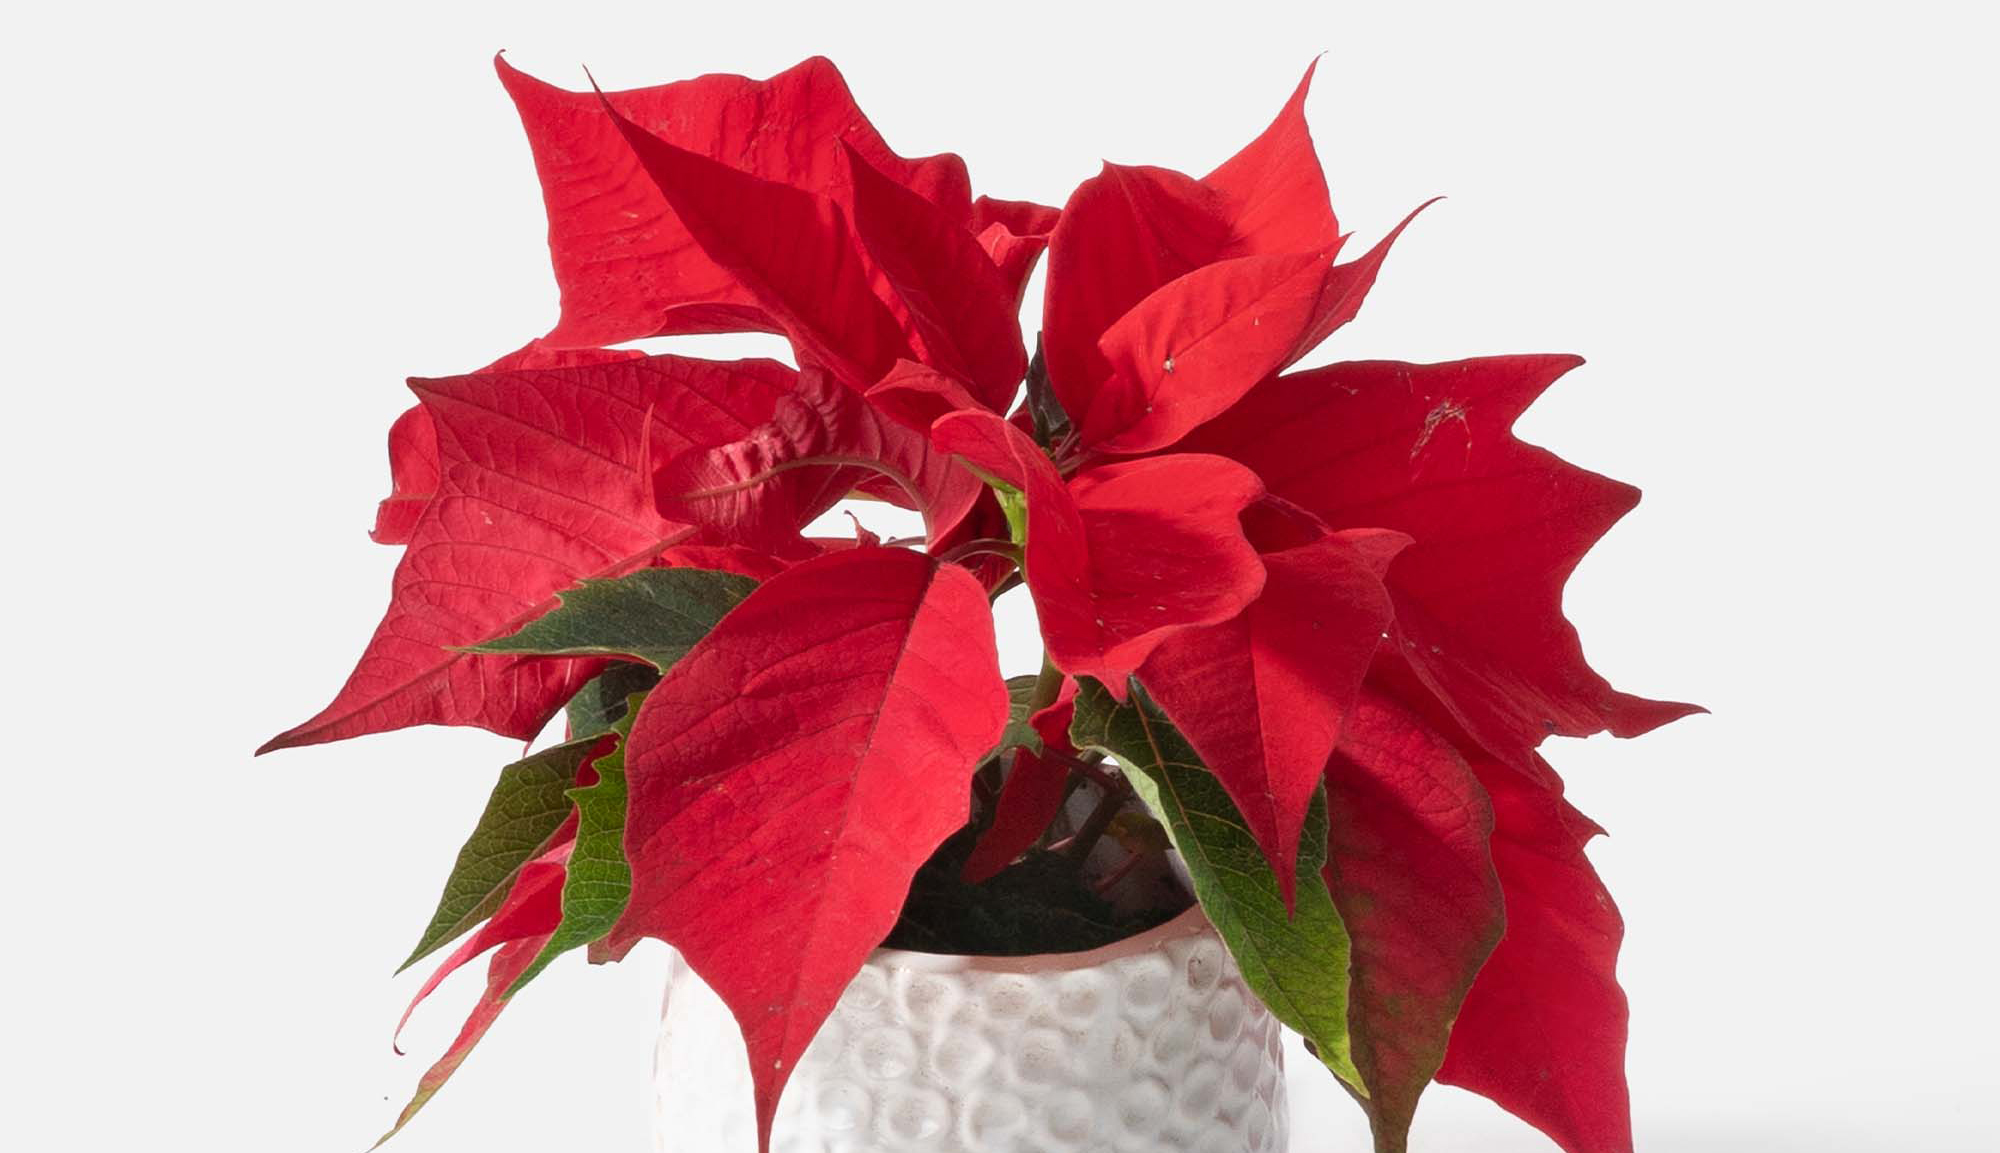 Close up image of a holiday poinsettia plant